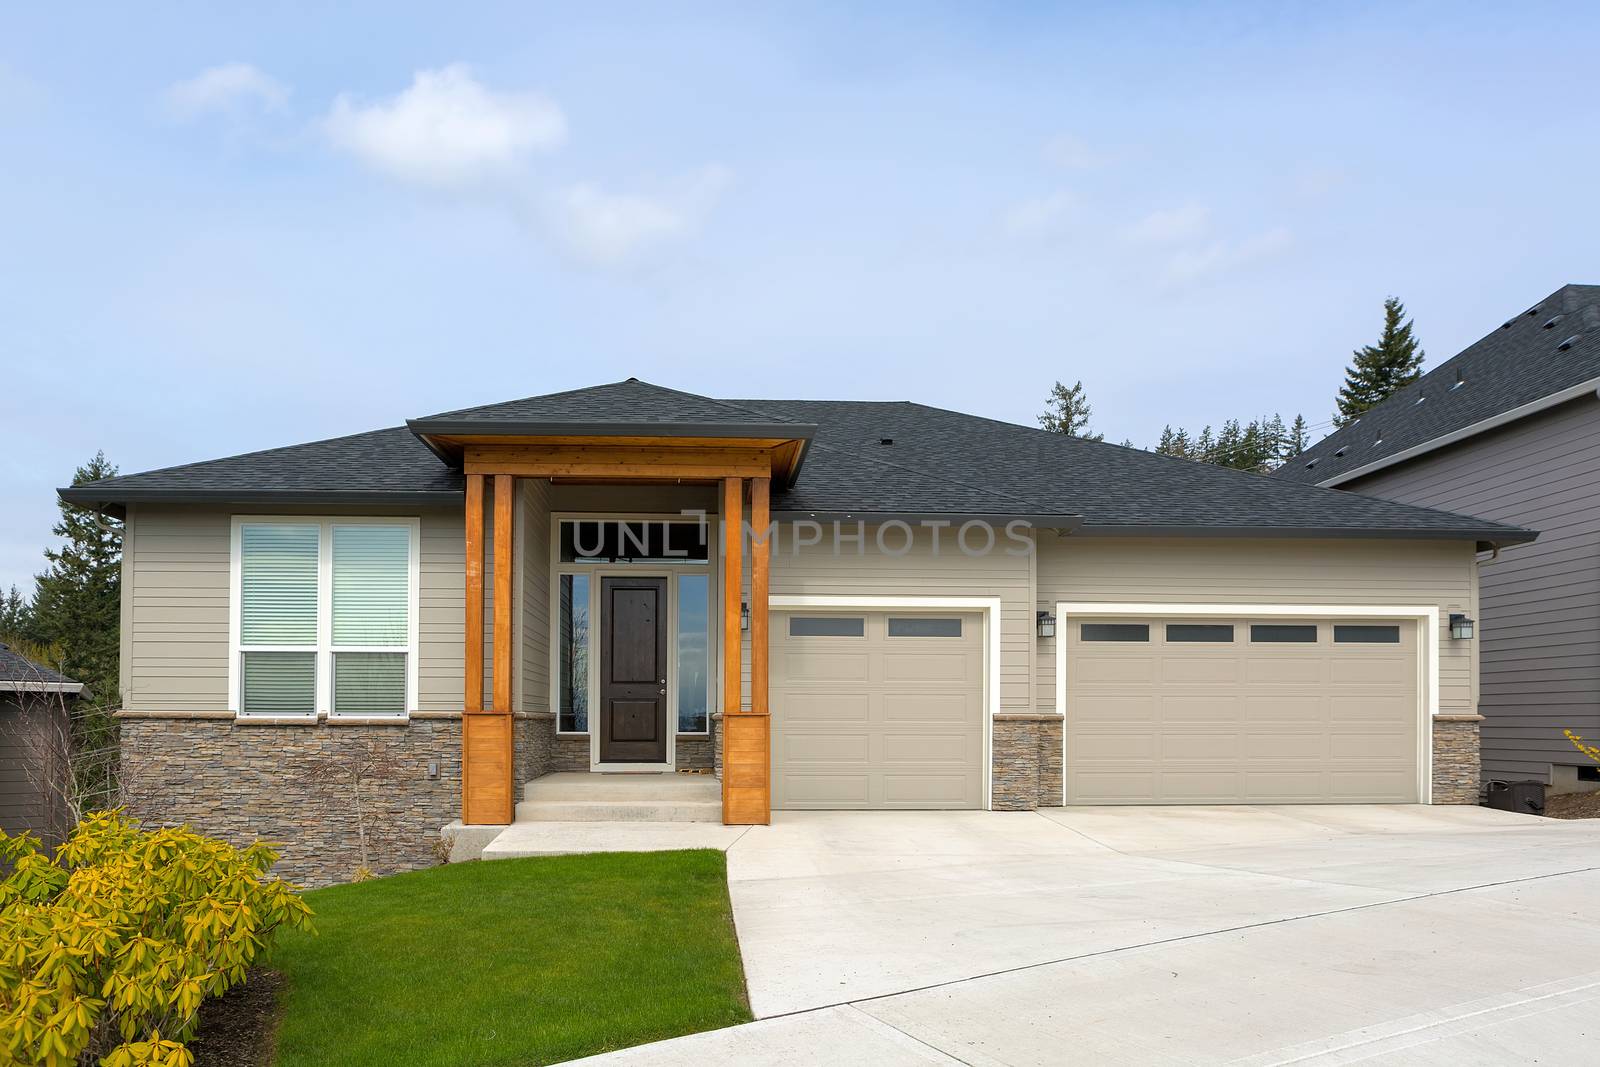 New custom built house in Happy Valley Oregon suburban neighborhood with three car garage and manicured front lawn